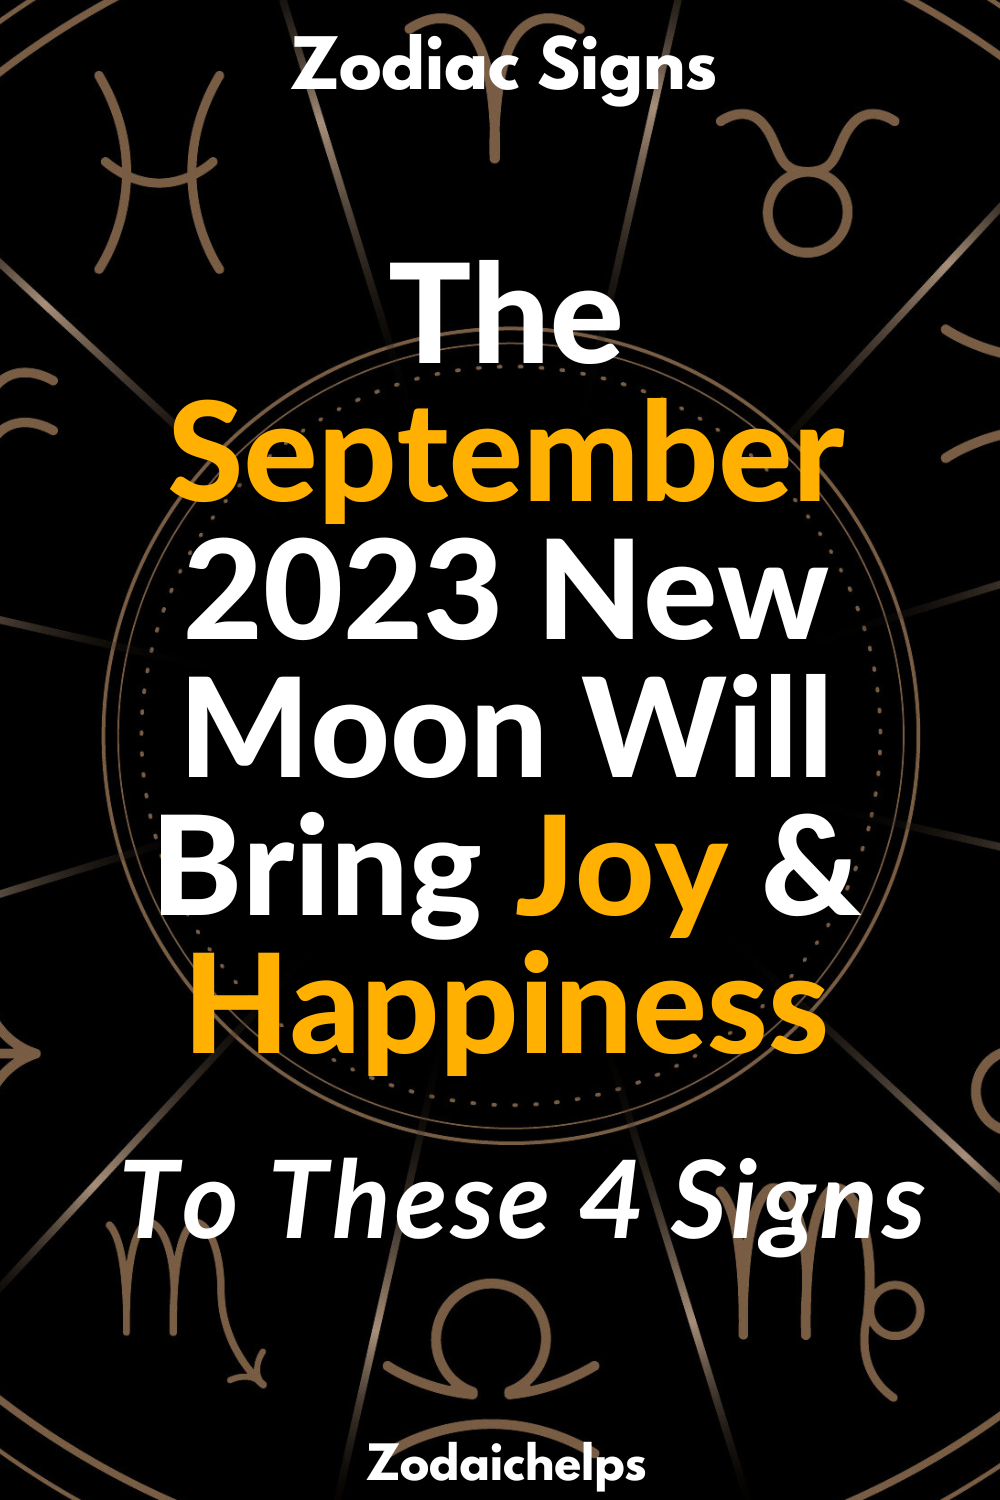 The September 2023 New Moon Will Bring Joy & Happiness To These 4 Signs